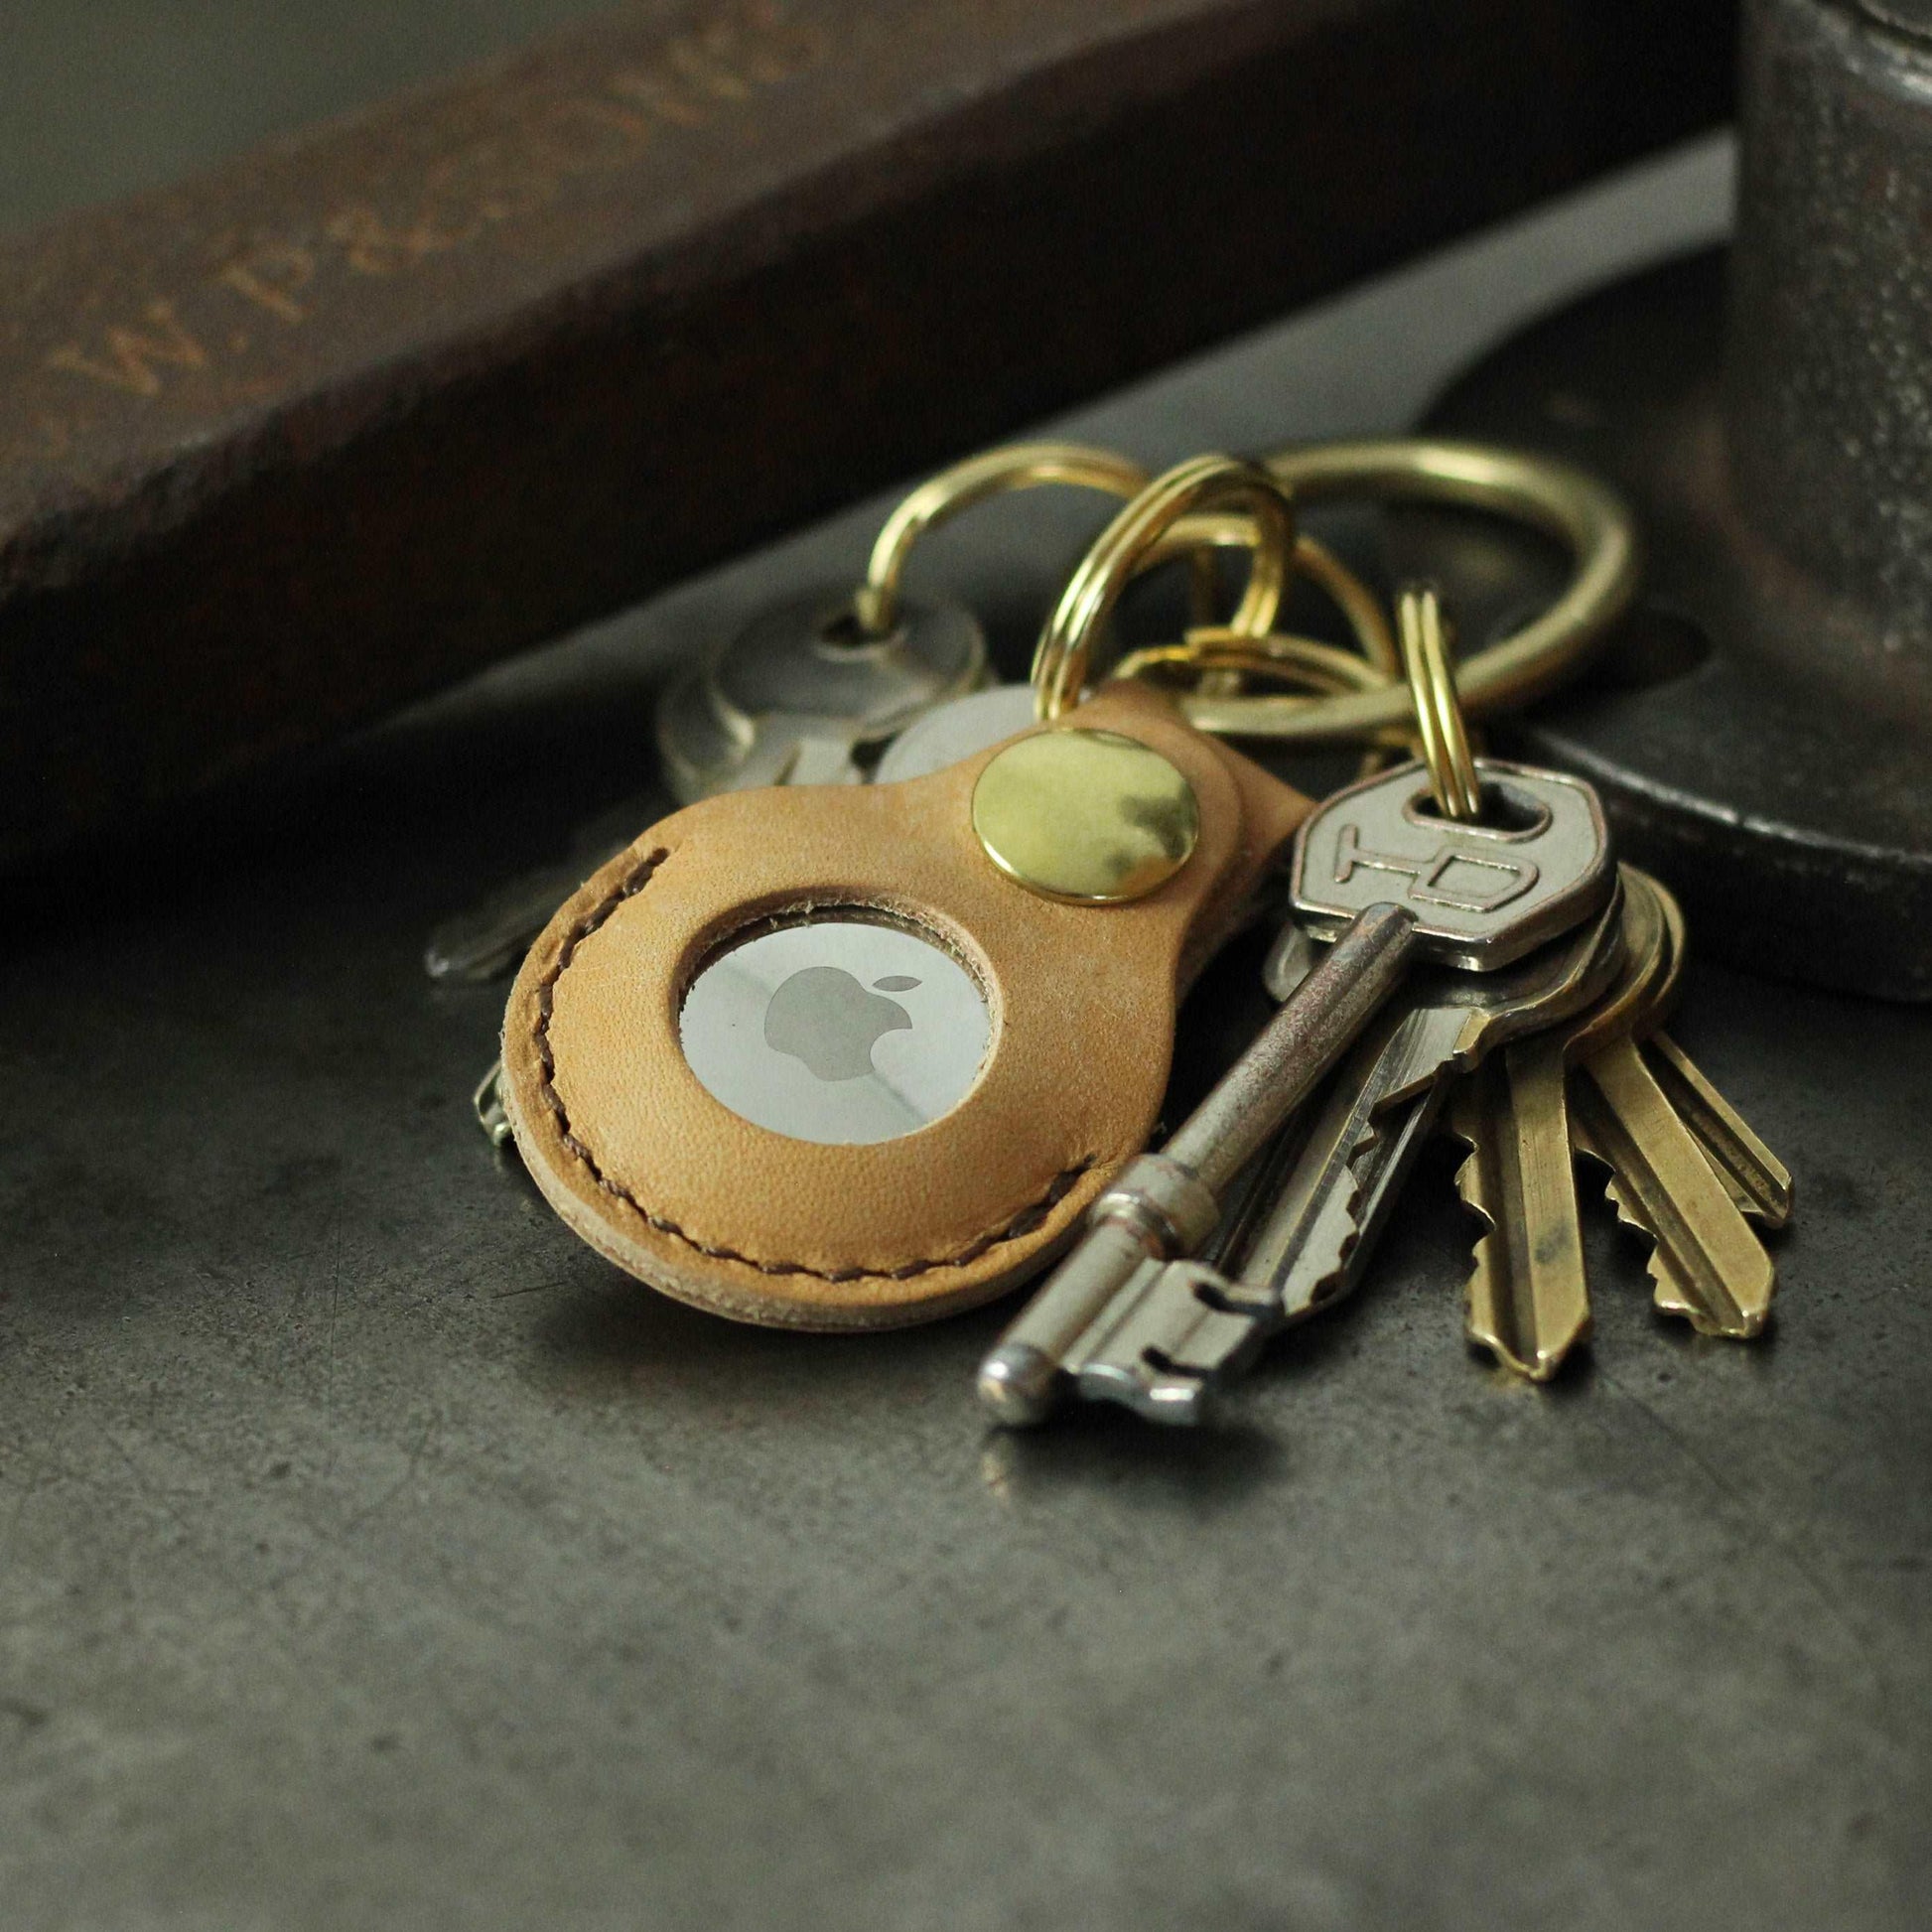 ashley clarke's leather apple airtag case key fob with keys attached